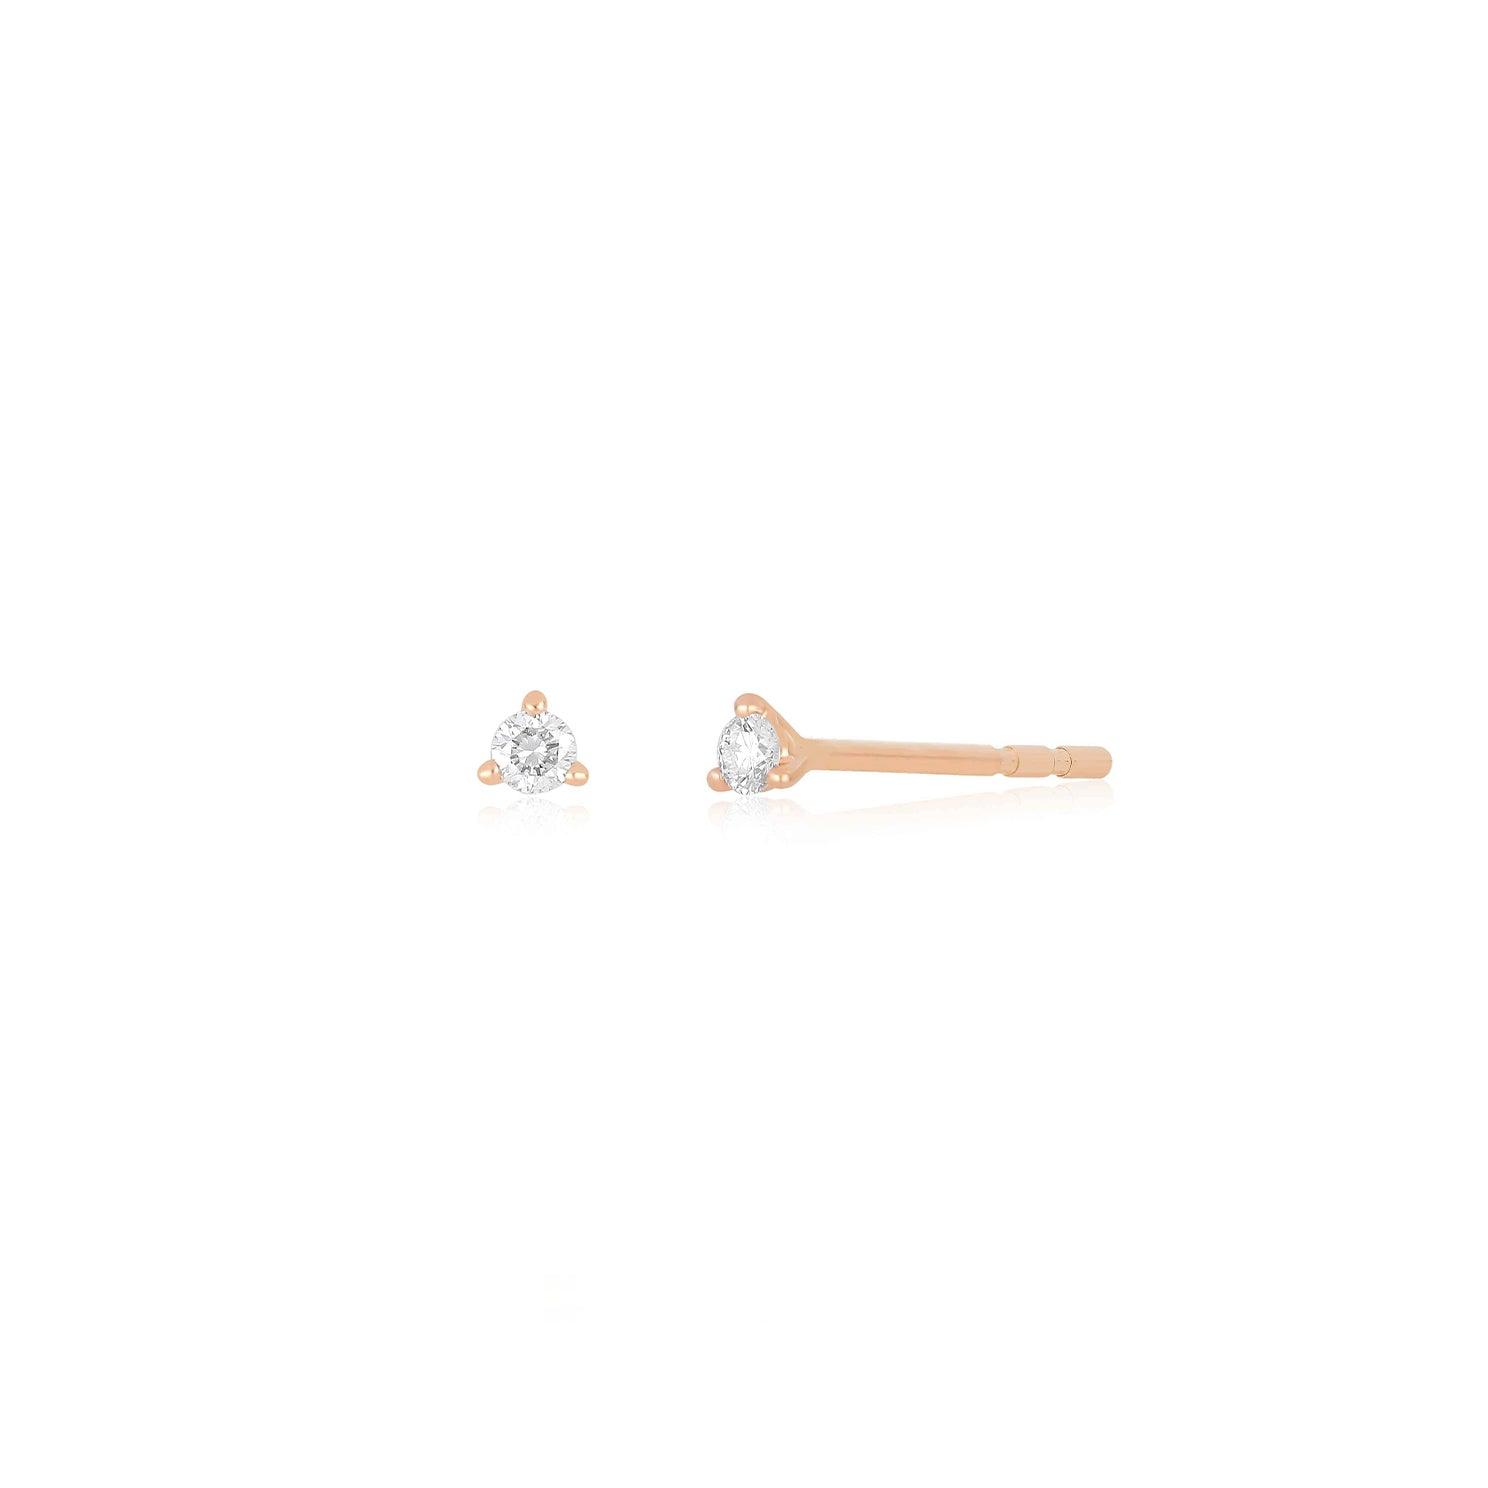 Baby Solitaire Diamond Stud Earring in 14k rose gold